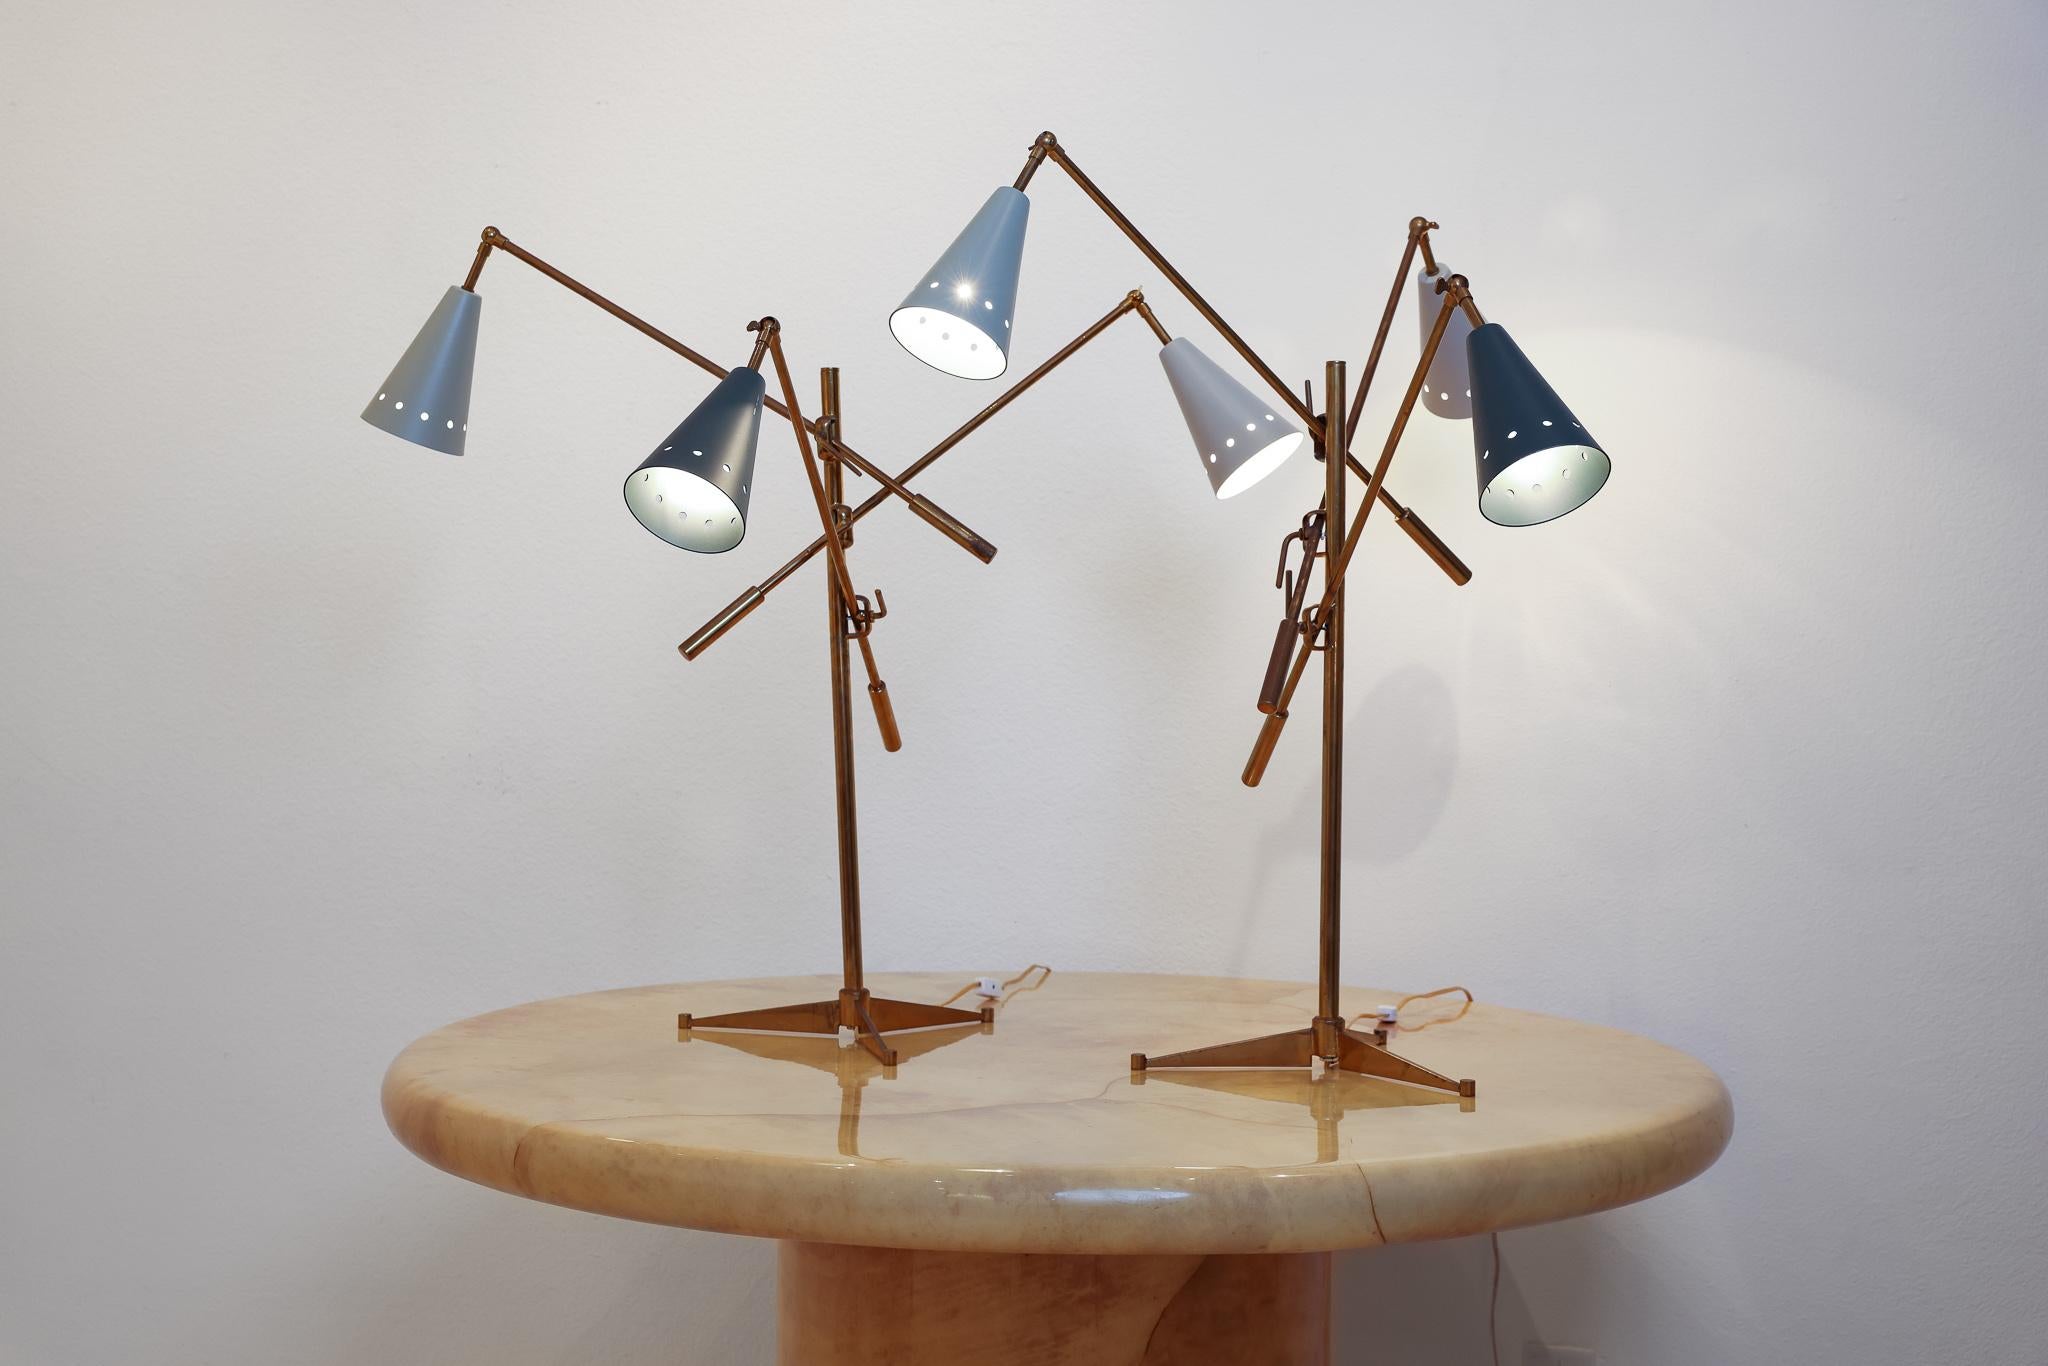 These 2 brass and enamel Triennale style table lamps are in exceptional shape. Circa, 1950's, this sculptural style lighting epitomized mid century decor. Much more readily available as floor lamps, these triennale table lamps are a rare treasure!